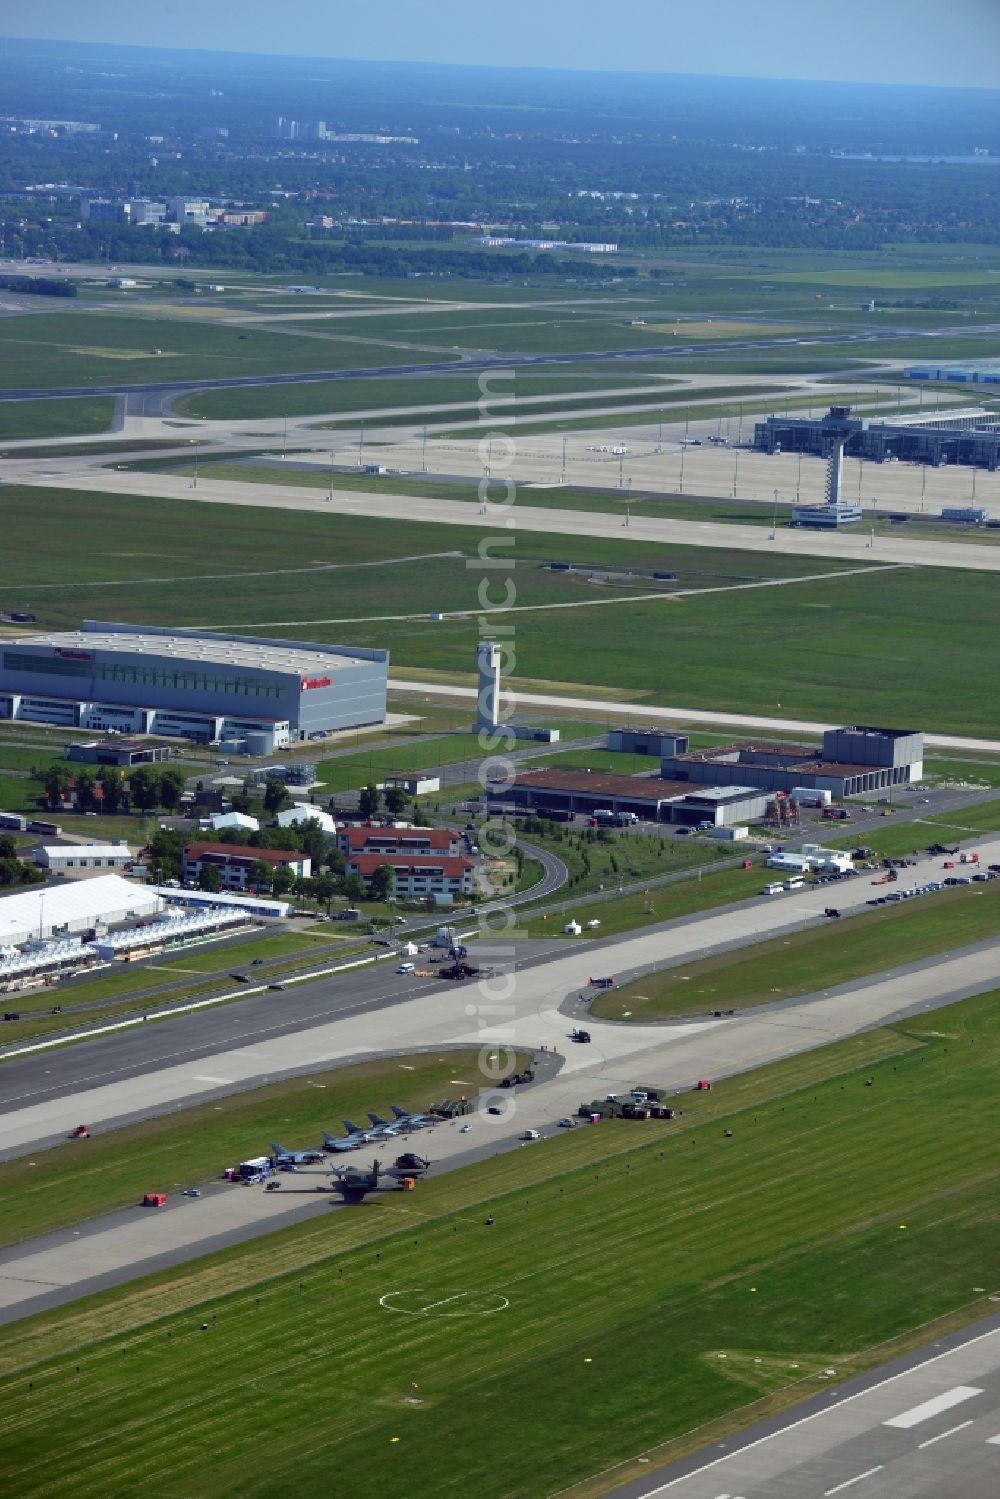 Aerial photograph Schönefeld Selchow - View of the exhibition grounds of the International Air Show ILA 2014 on the grounds of the airport Berlin-Schoenefeld-Selchow before the opening